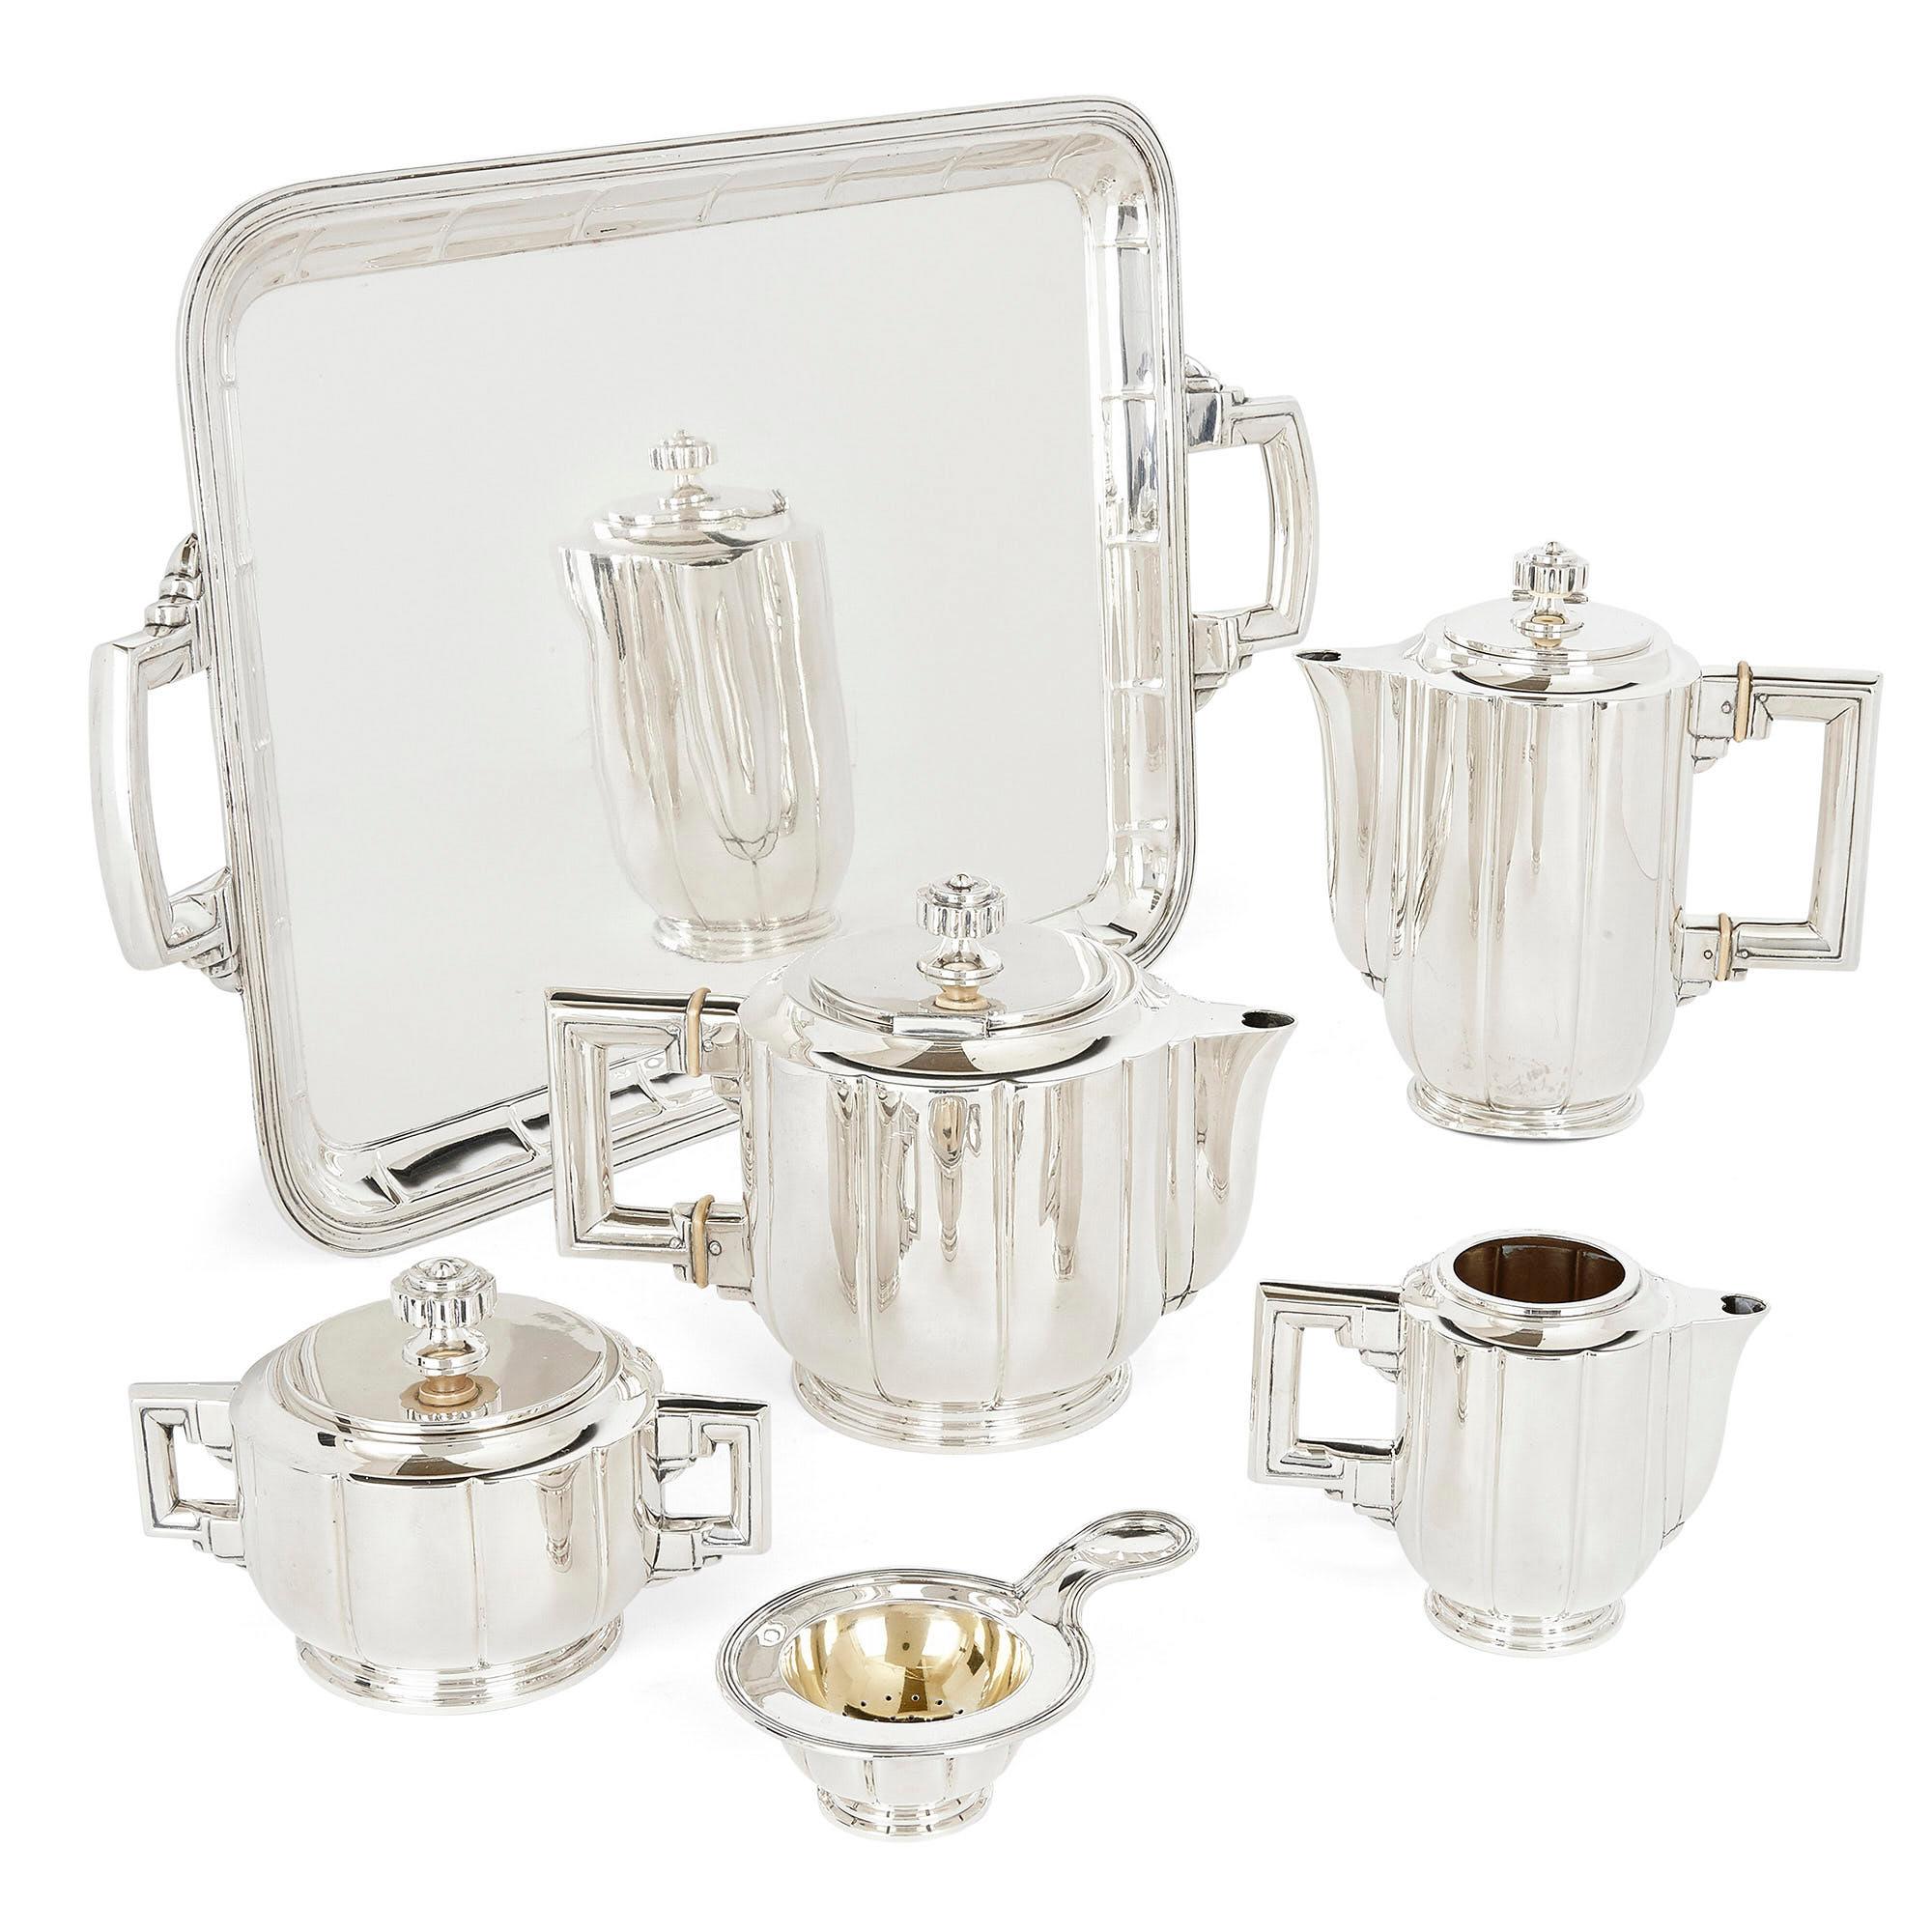 Art Deco Spanish silver coffee and tea set
Spanish, c. 1930
Tray: height 3cm, width 56cm, depth 35cm
Milk jug: height 10cm, width 13cm, depth 8cm

This fine Spanish Art Deco tea and coffee service is by the important Barcelona-based silversmith